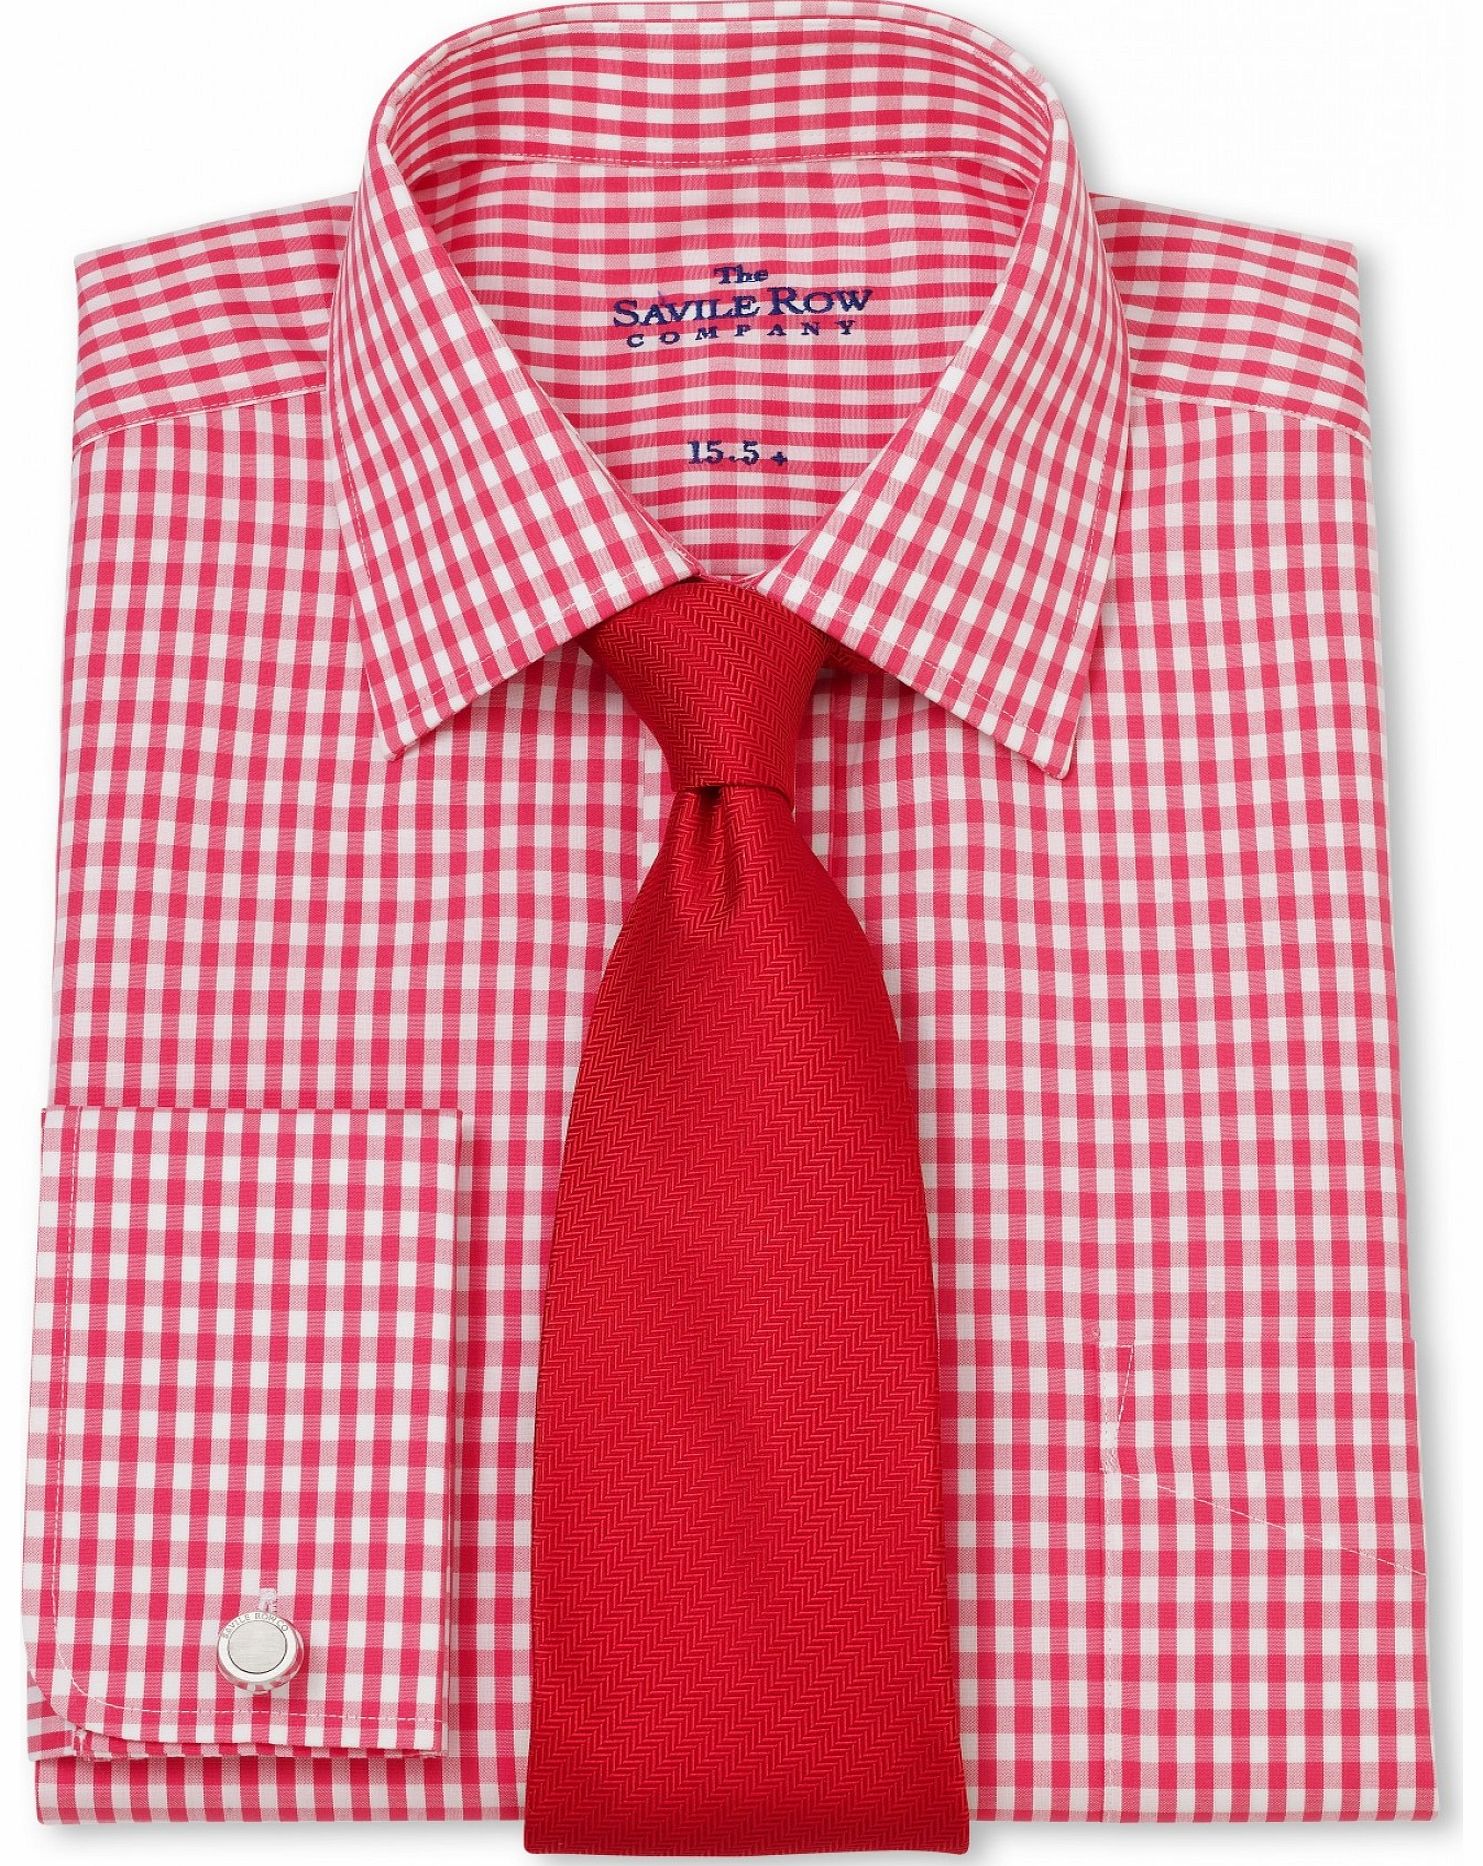 Savile Row Company Pink White Gingham Check Classic Fit Shirt 19``